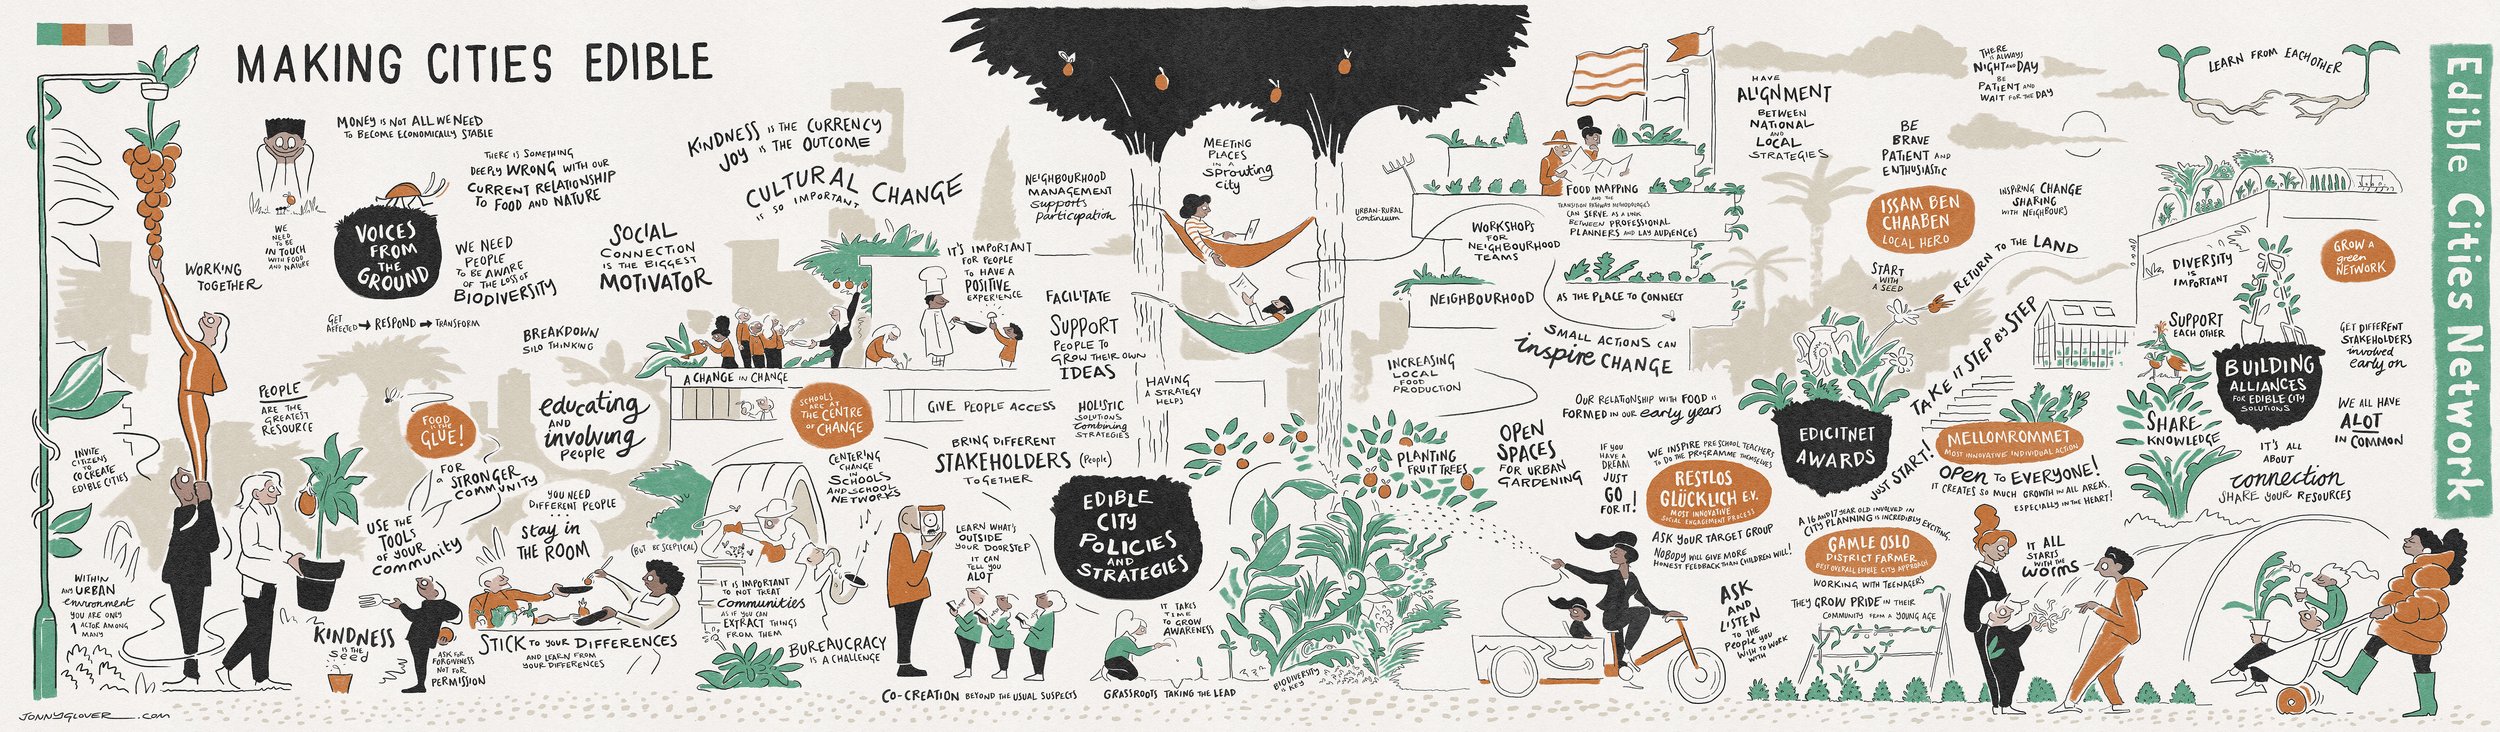 Graphic-Recording-Edible-Cities-Conference-22-Jonny-Glover-WEB-Quality.jpg